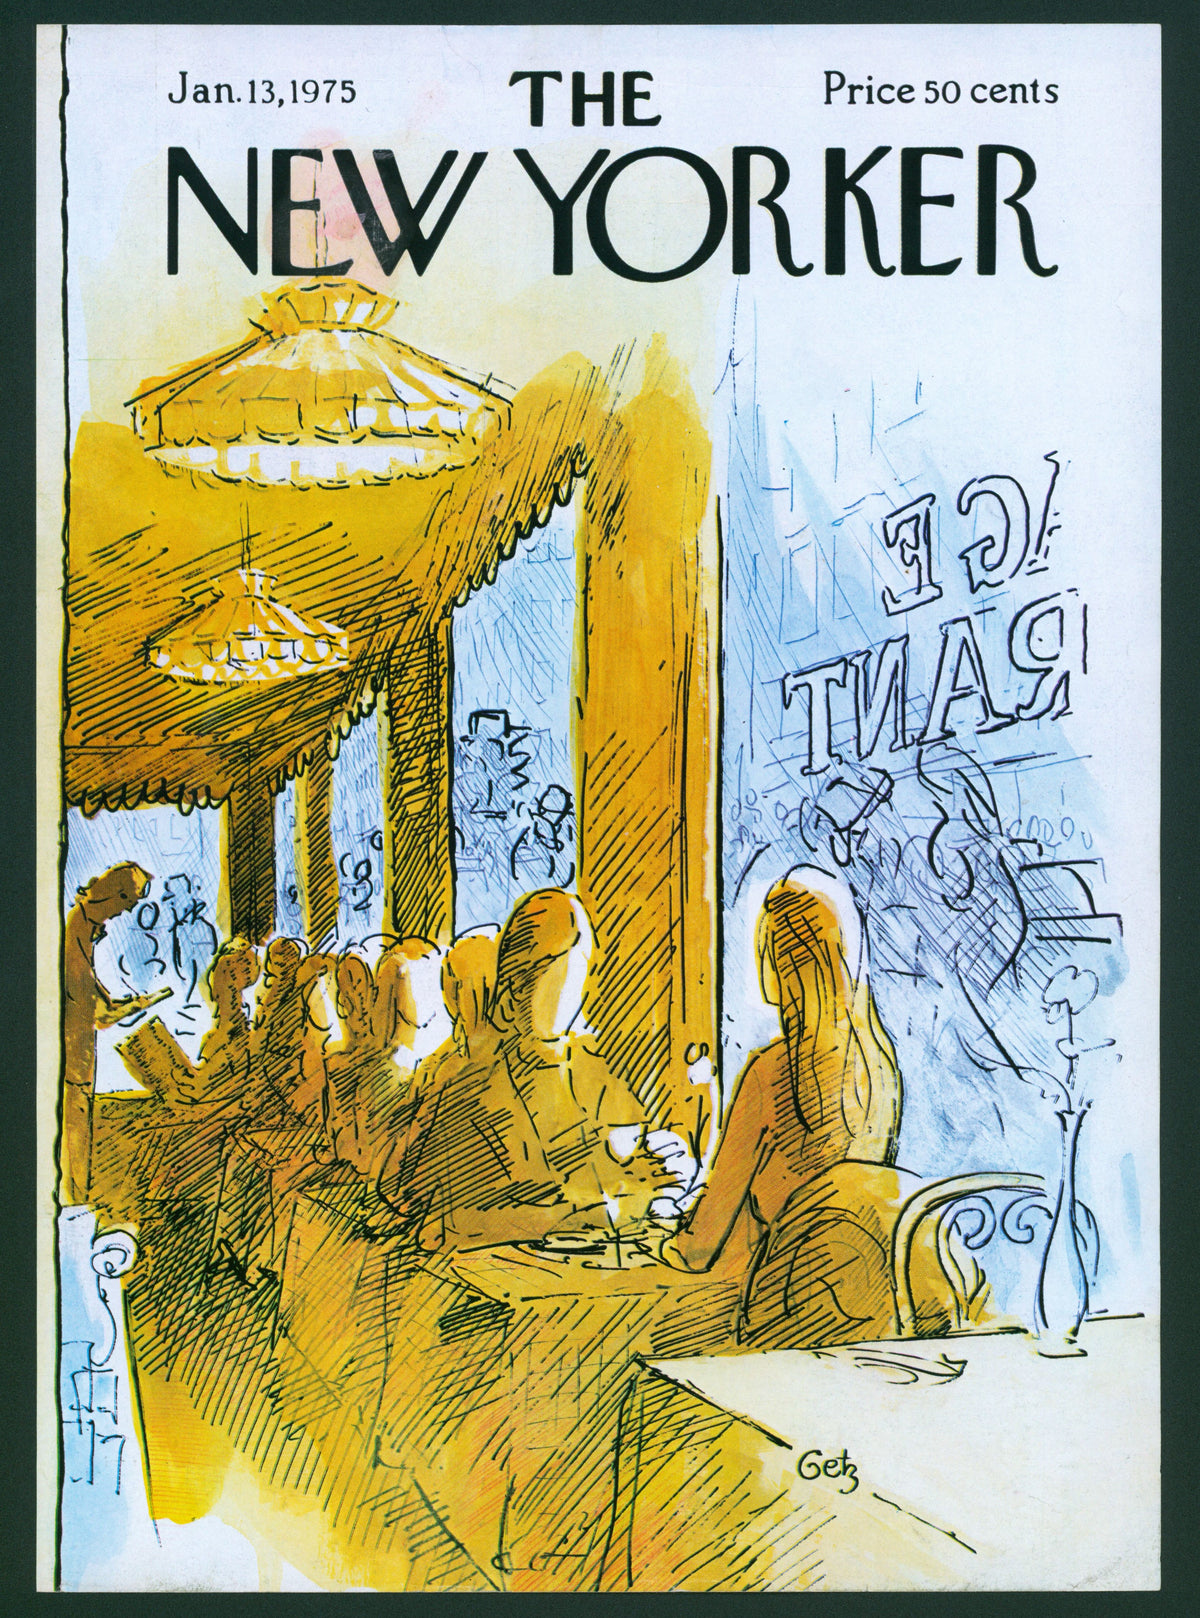 Afternoon Coffee- The New Yorker - Authentic Vintage Antique Print